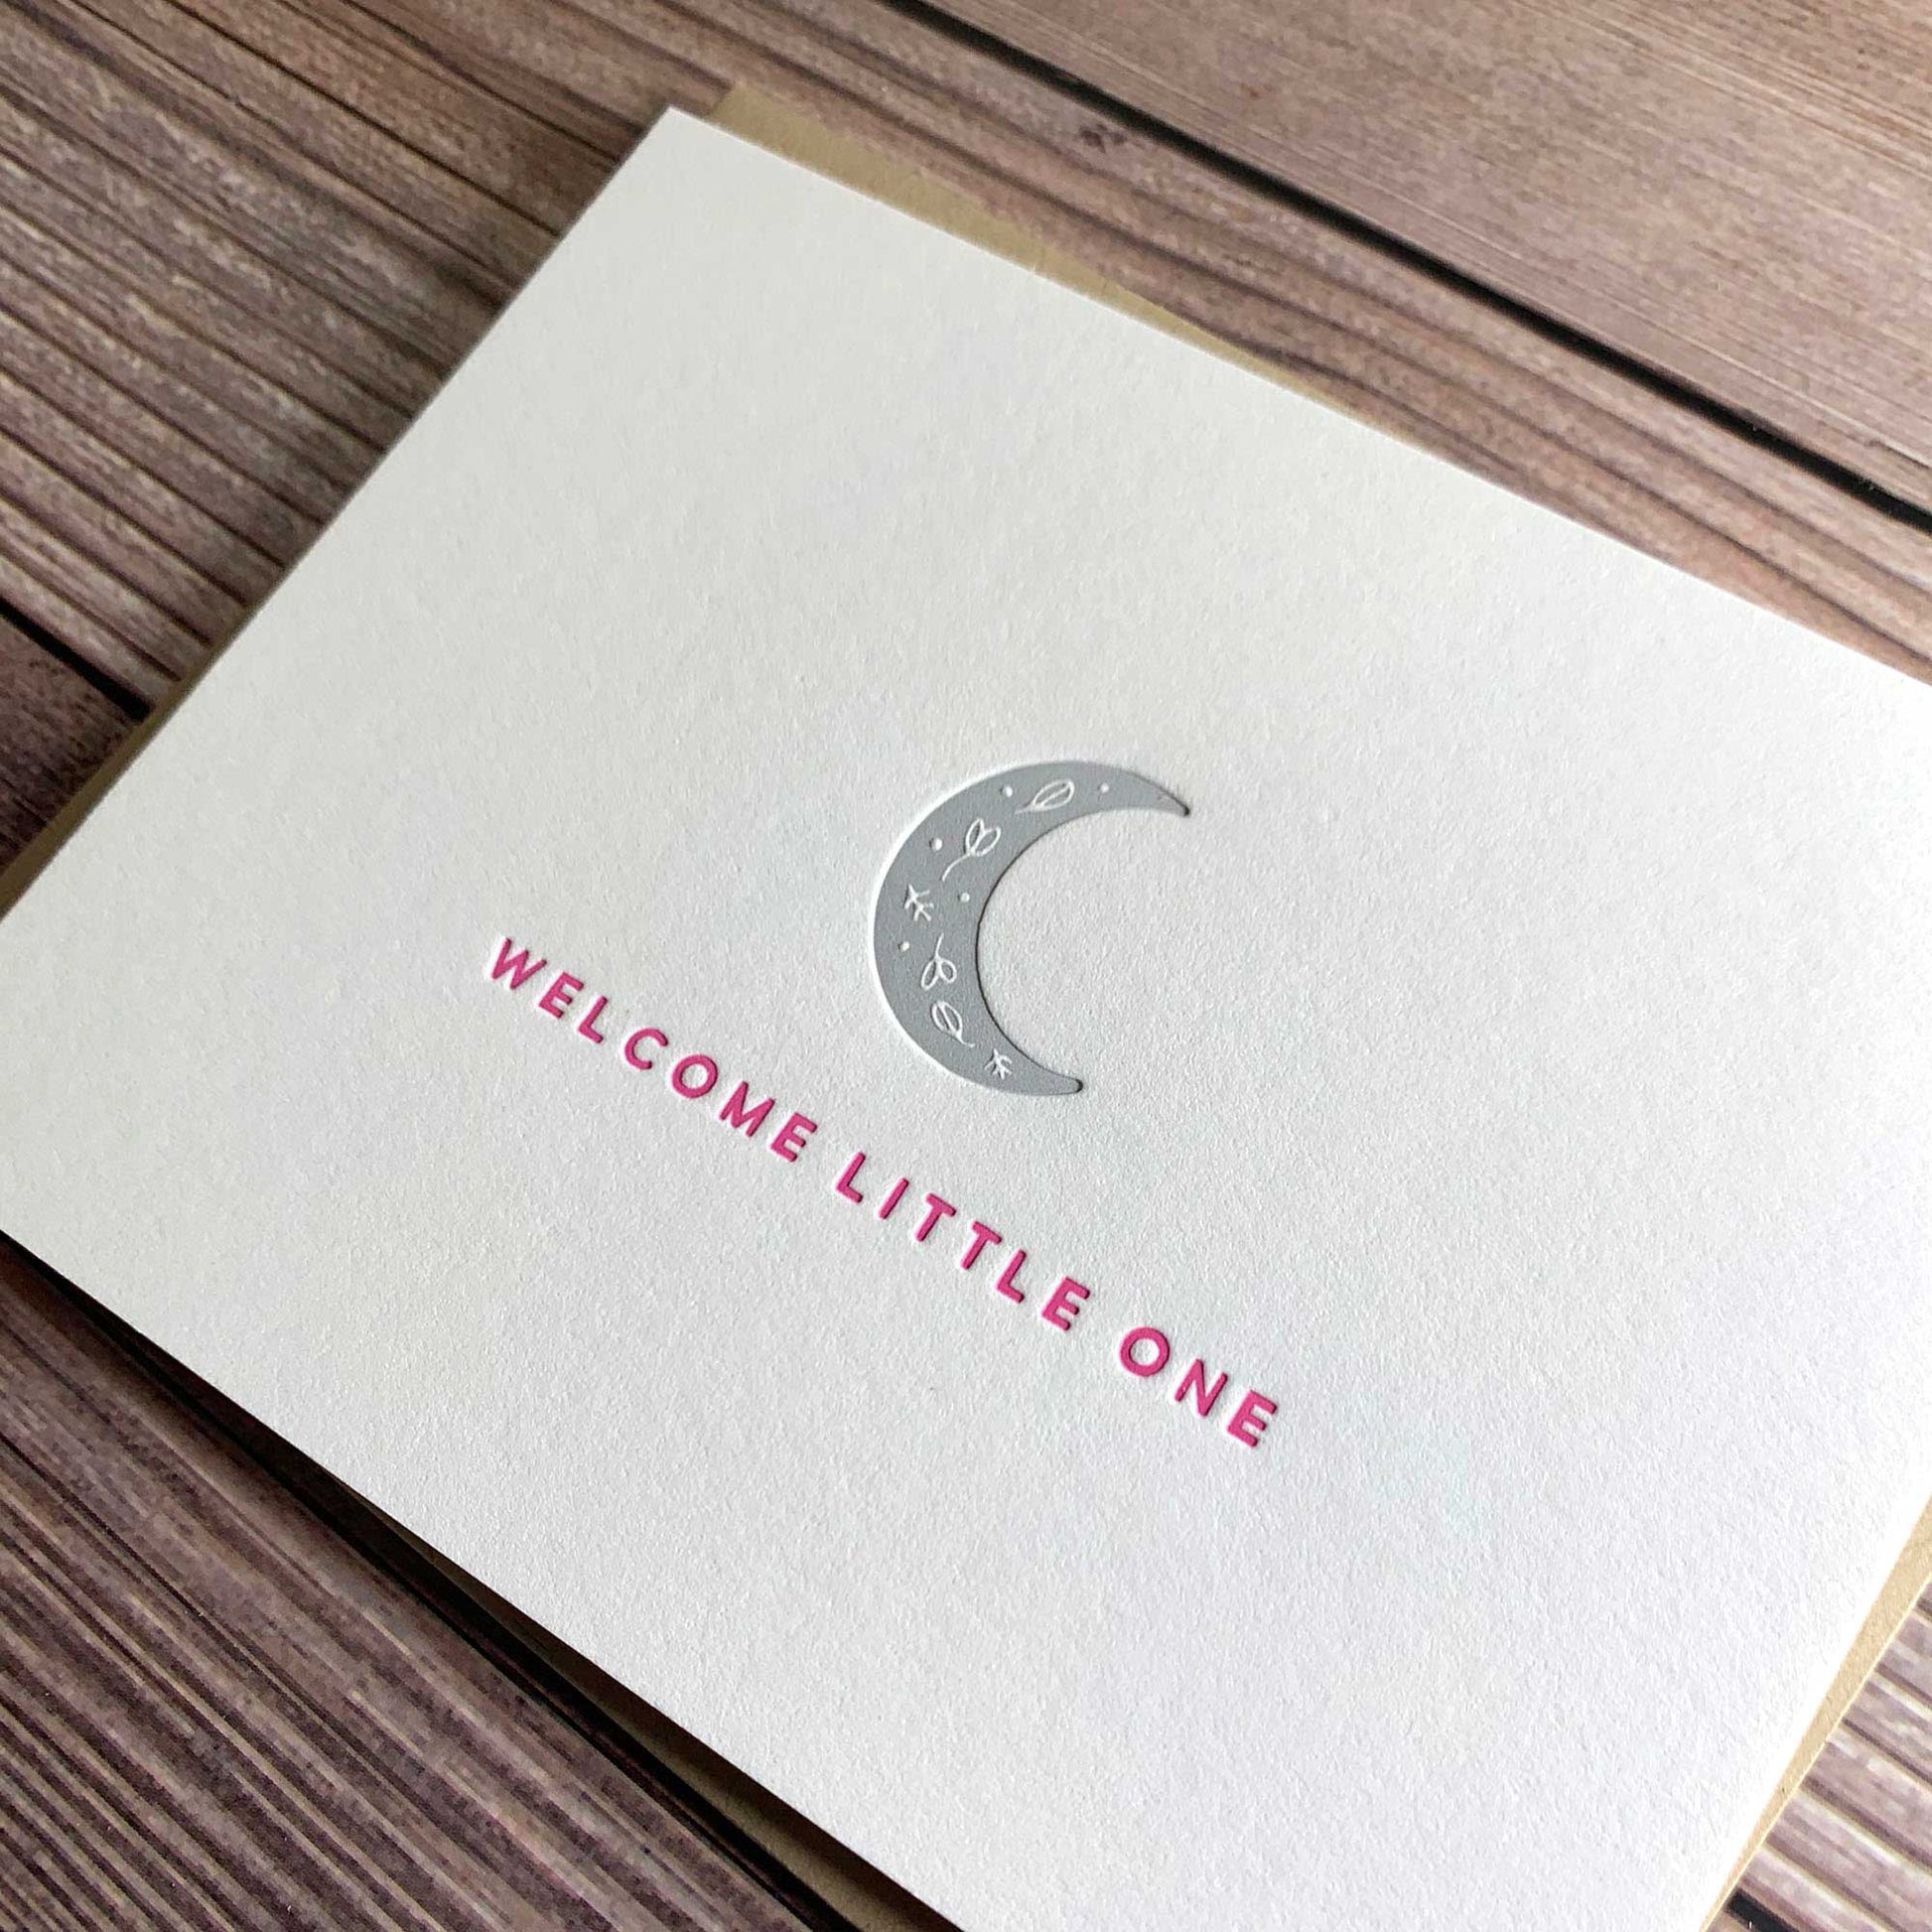 Welcome little one, new baby Card, floral moon, Letterpress printed, view shows letterpress impression, includes envelope